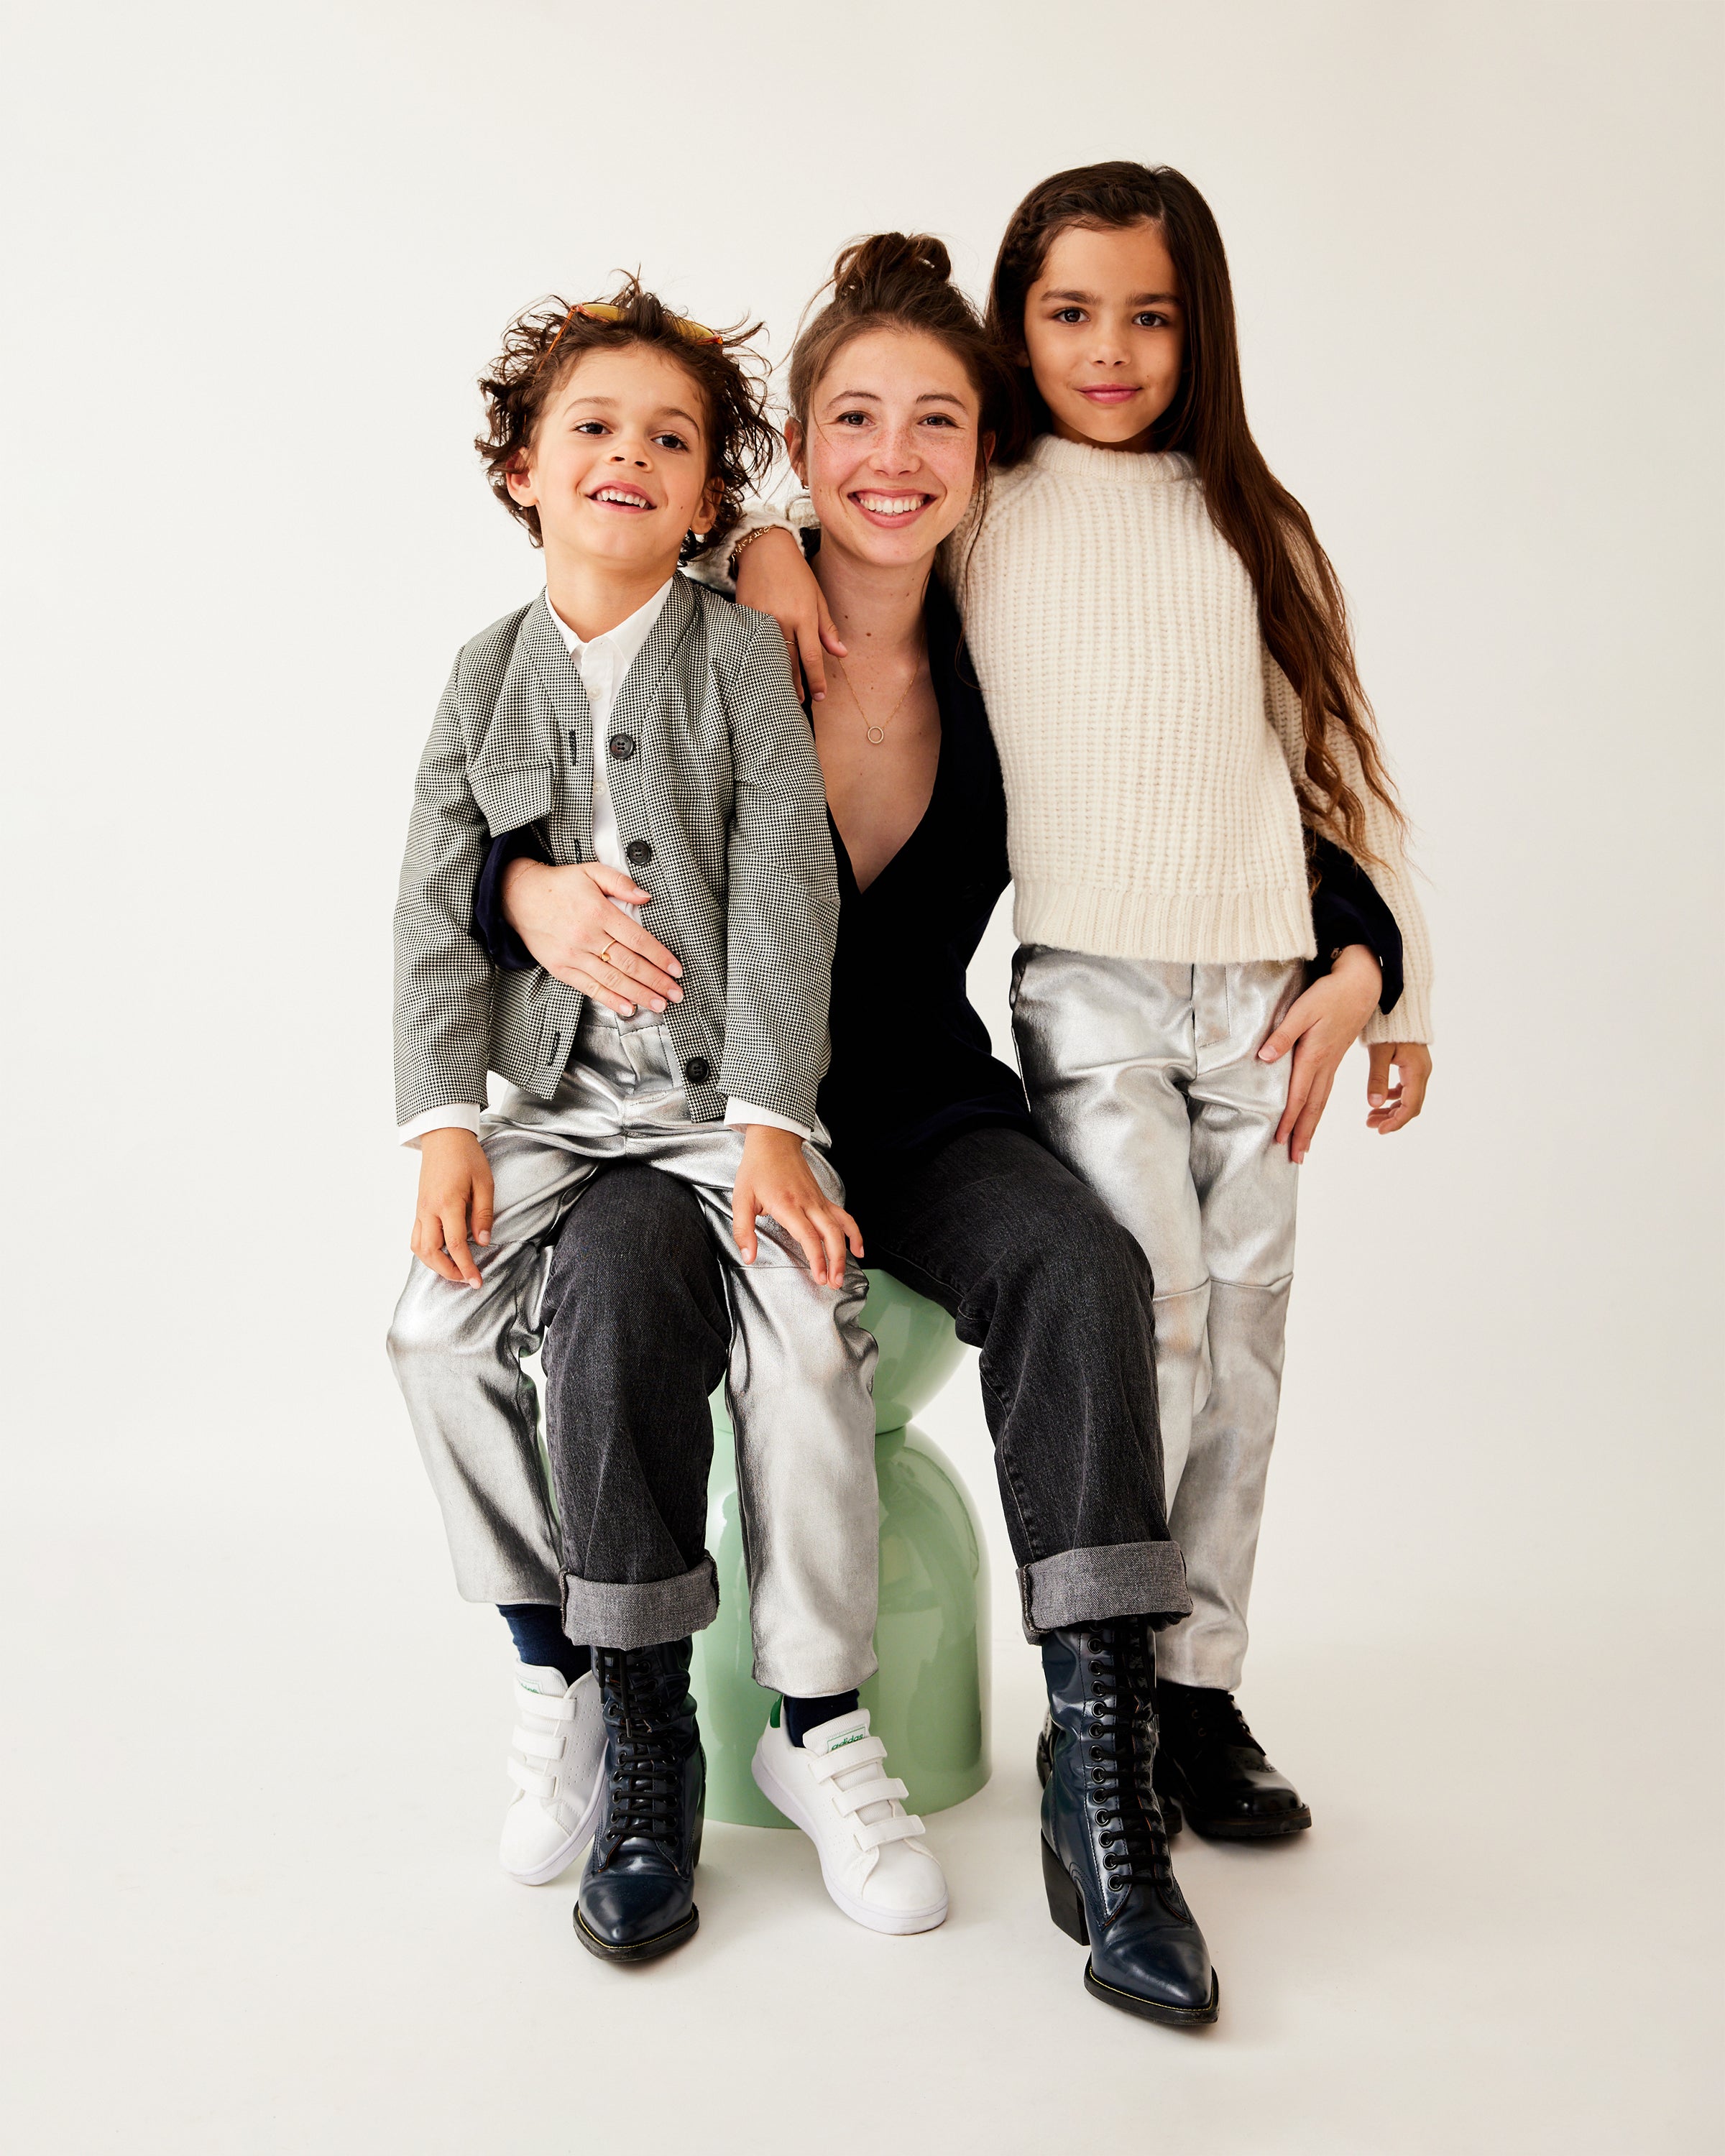 Kelly Kilby is the designer and founder behind this new high-end genderless kidswear brand. She redefines school outfits with modern, and timeless limited editions.